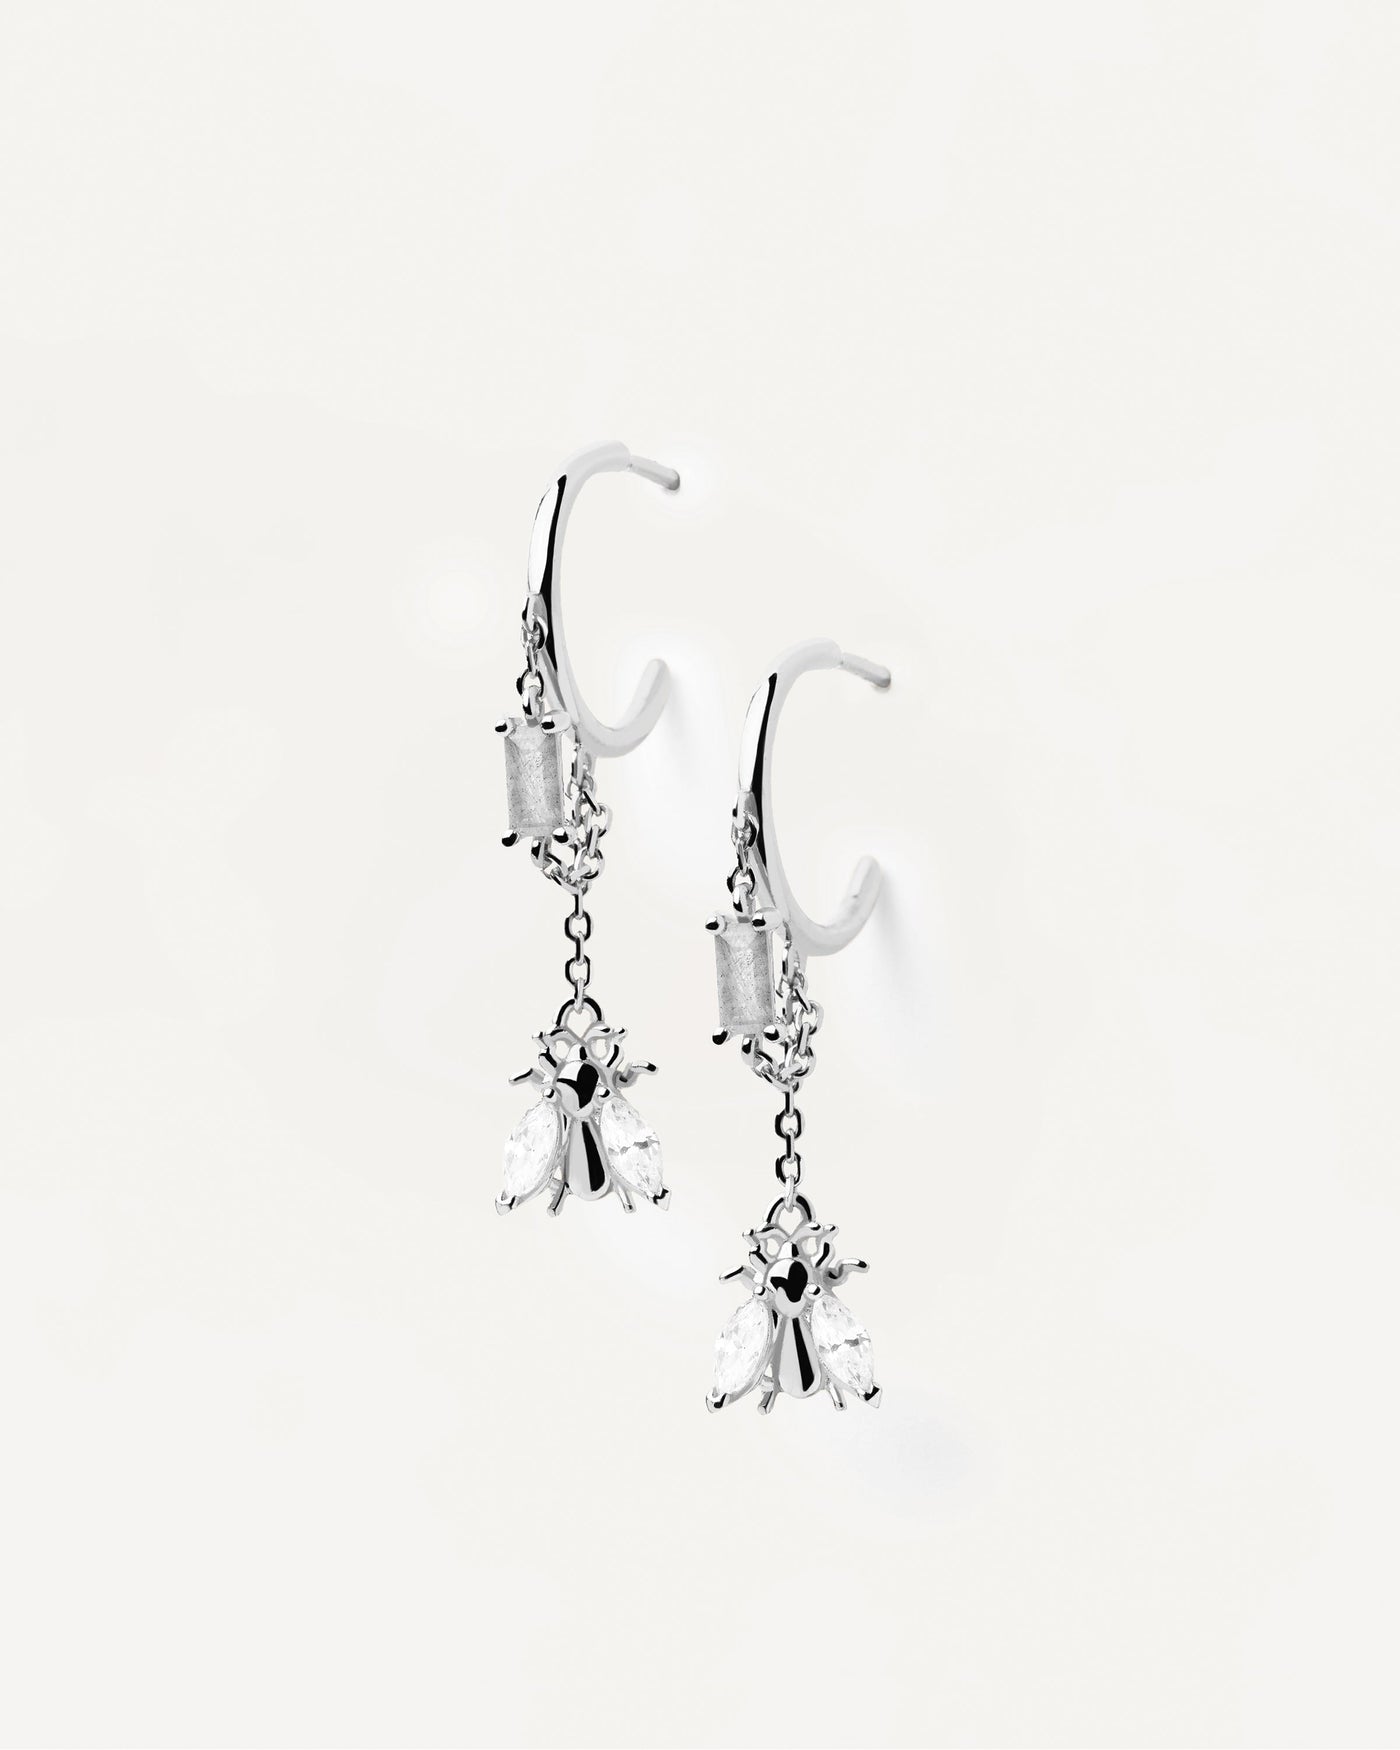 2022 Selection | Breeze Silver Earrings. Get the latest arrival from PDPAOLA. Place your order safely and get this Best Seller. Free Shipping over 40€